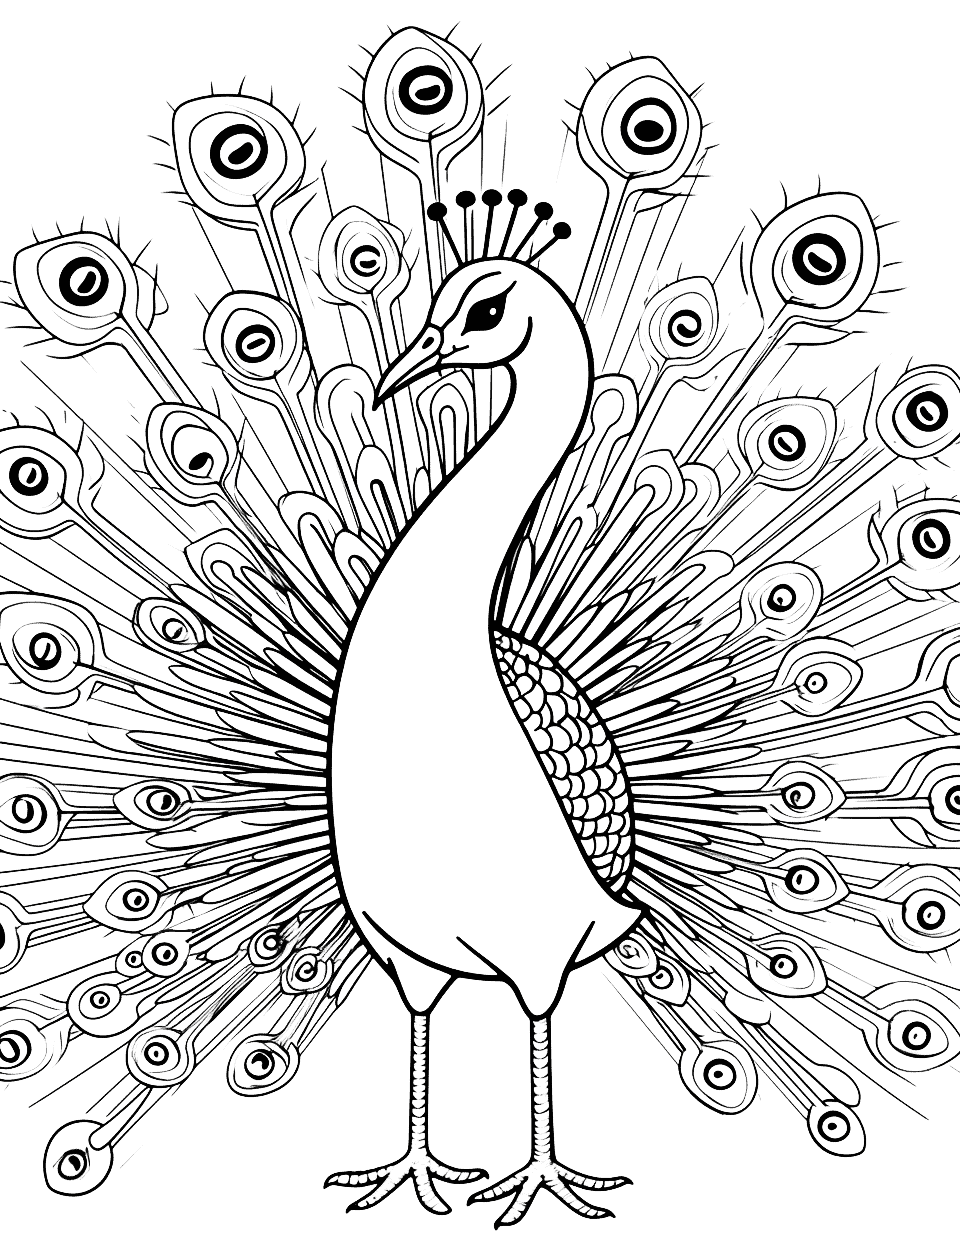 Detailed Peacock Cute Coloring Page - A majestic peacock with vibrant feathers and intricate patterns.